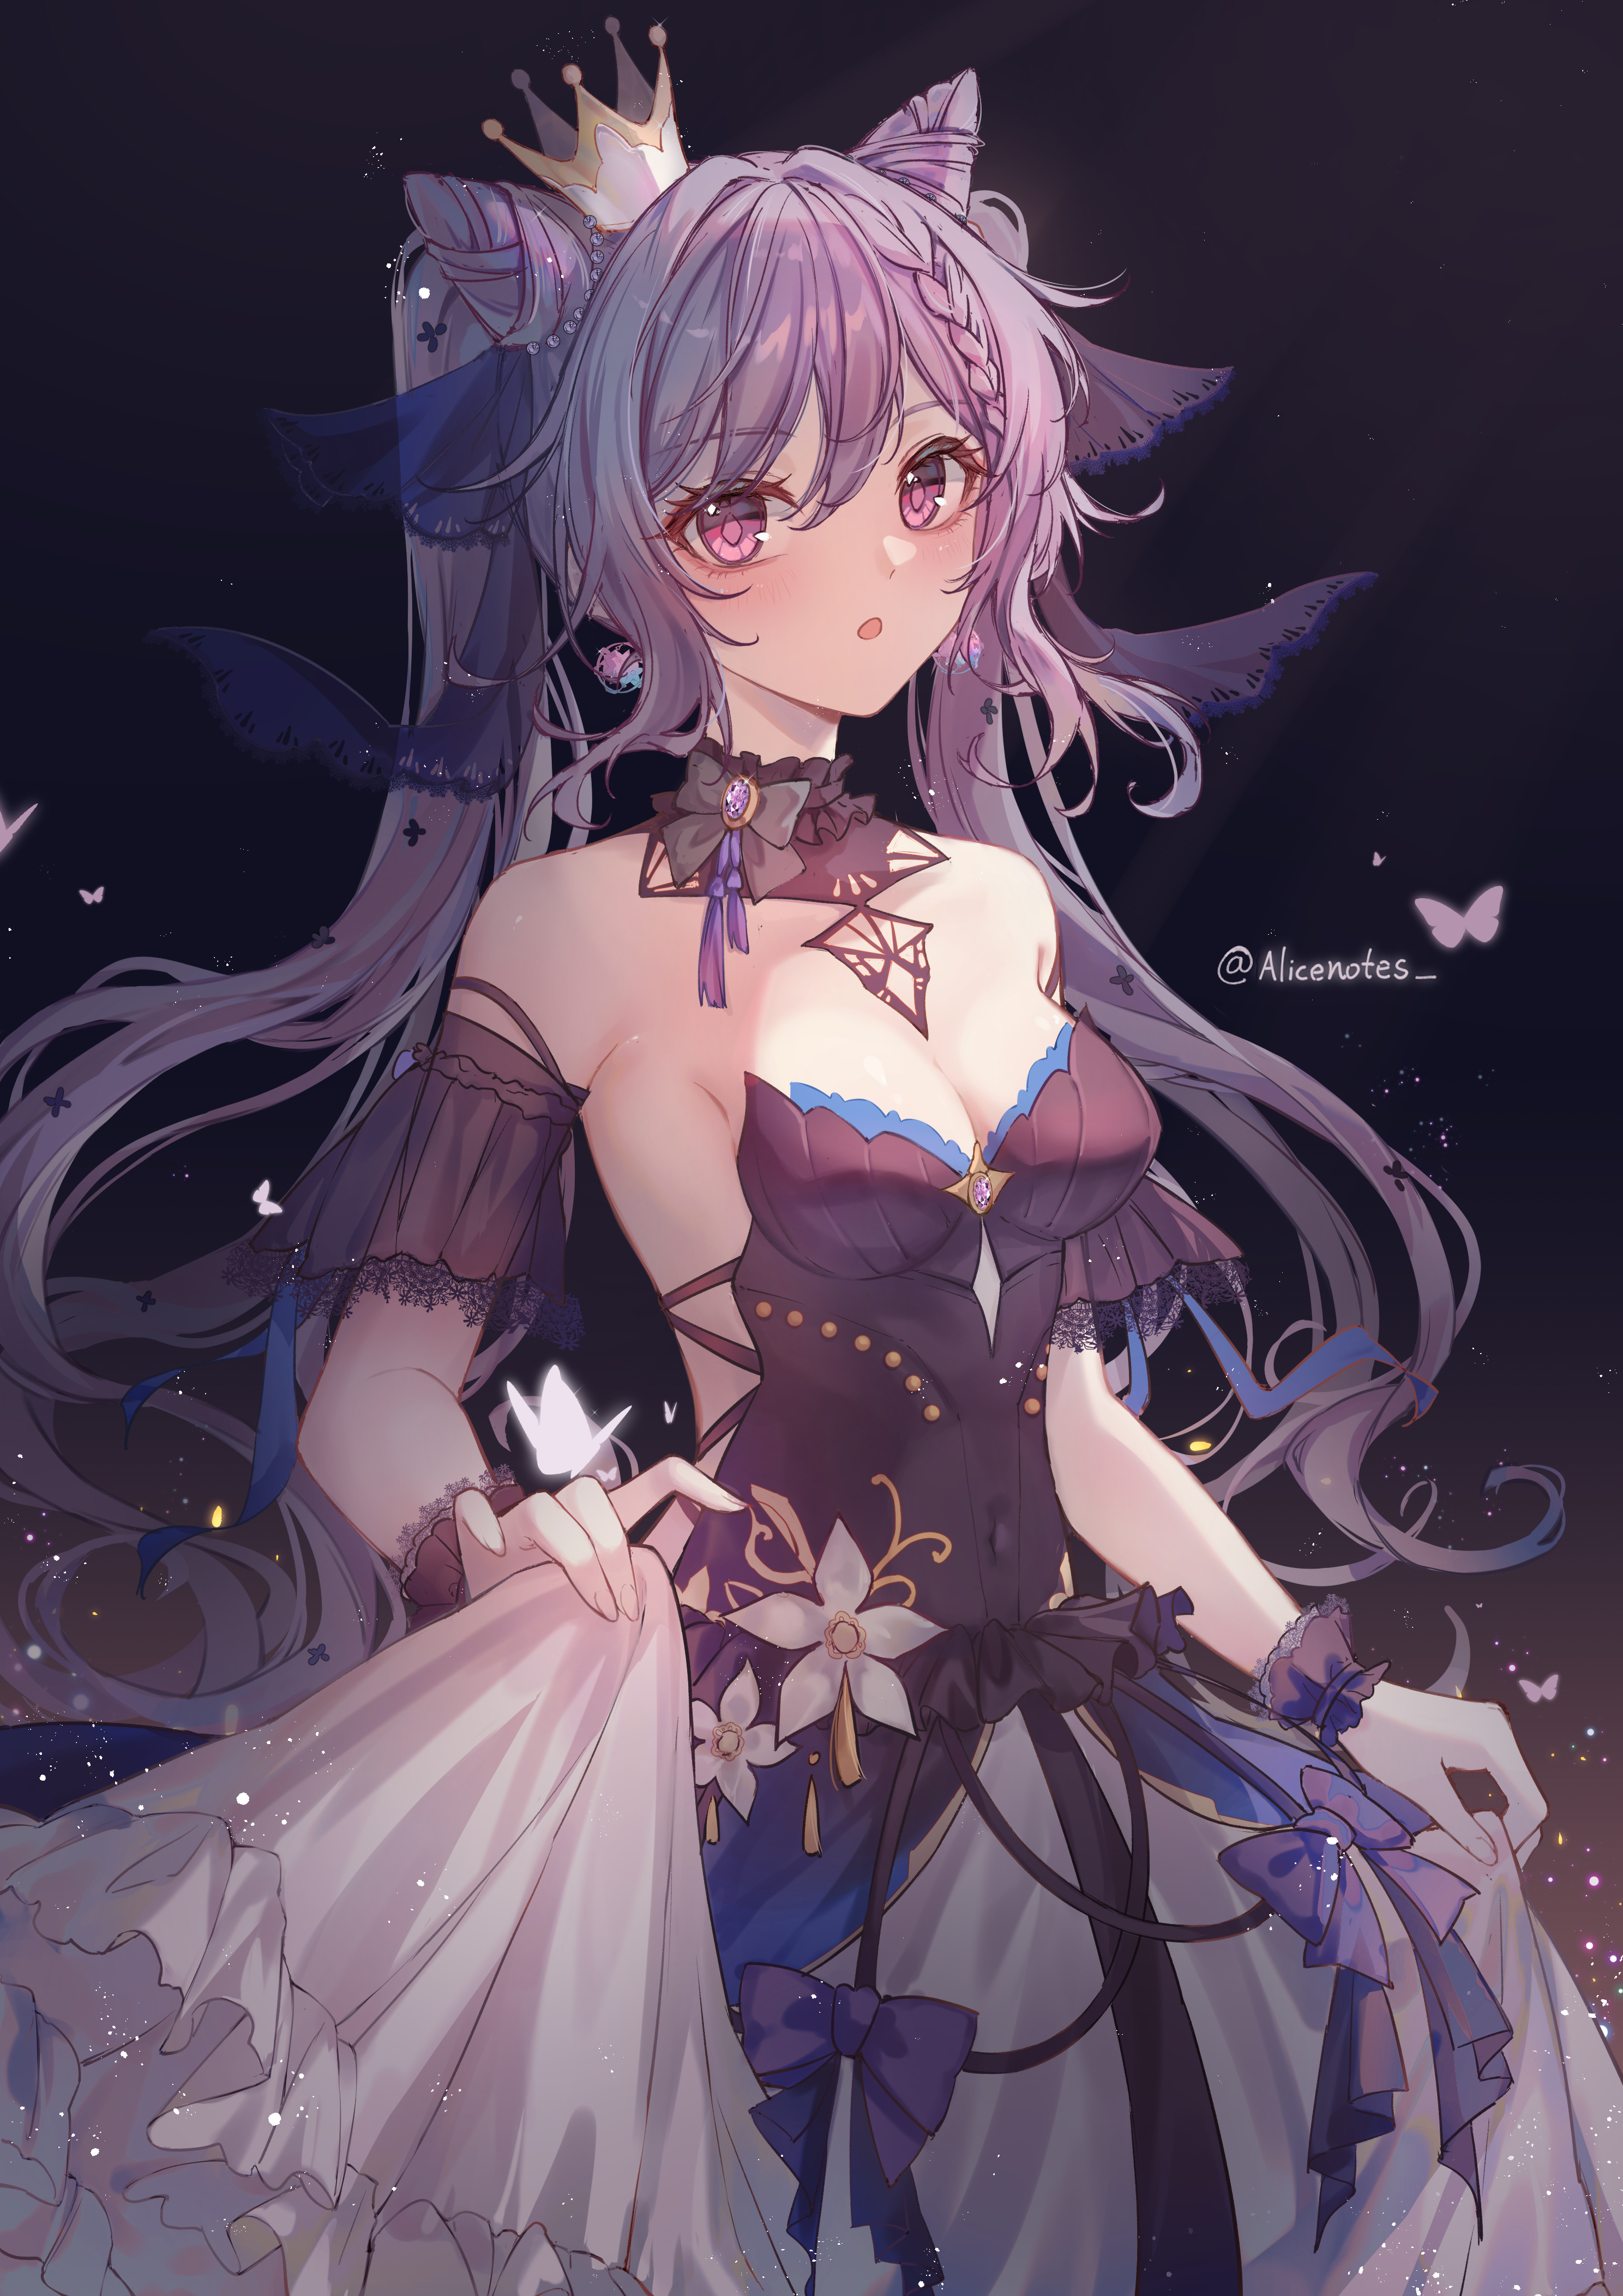 Anime 2976x4210 Genshin Impact artwork Keqing (Genshin Impact) anime anime girls purple hair purple eyes twintails cat ears cat girl crown dress bow tie cleavage earring butterfly portrait display looking at viewer lifting dress